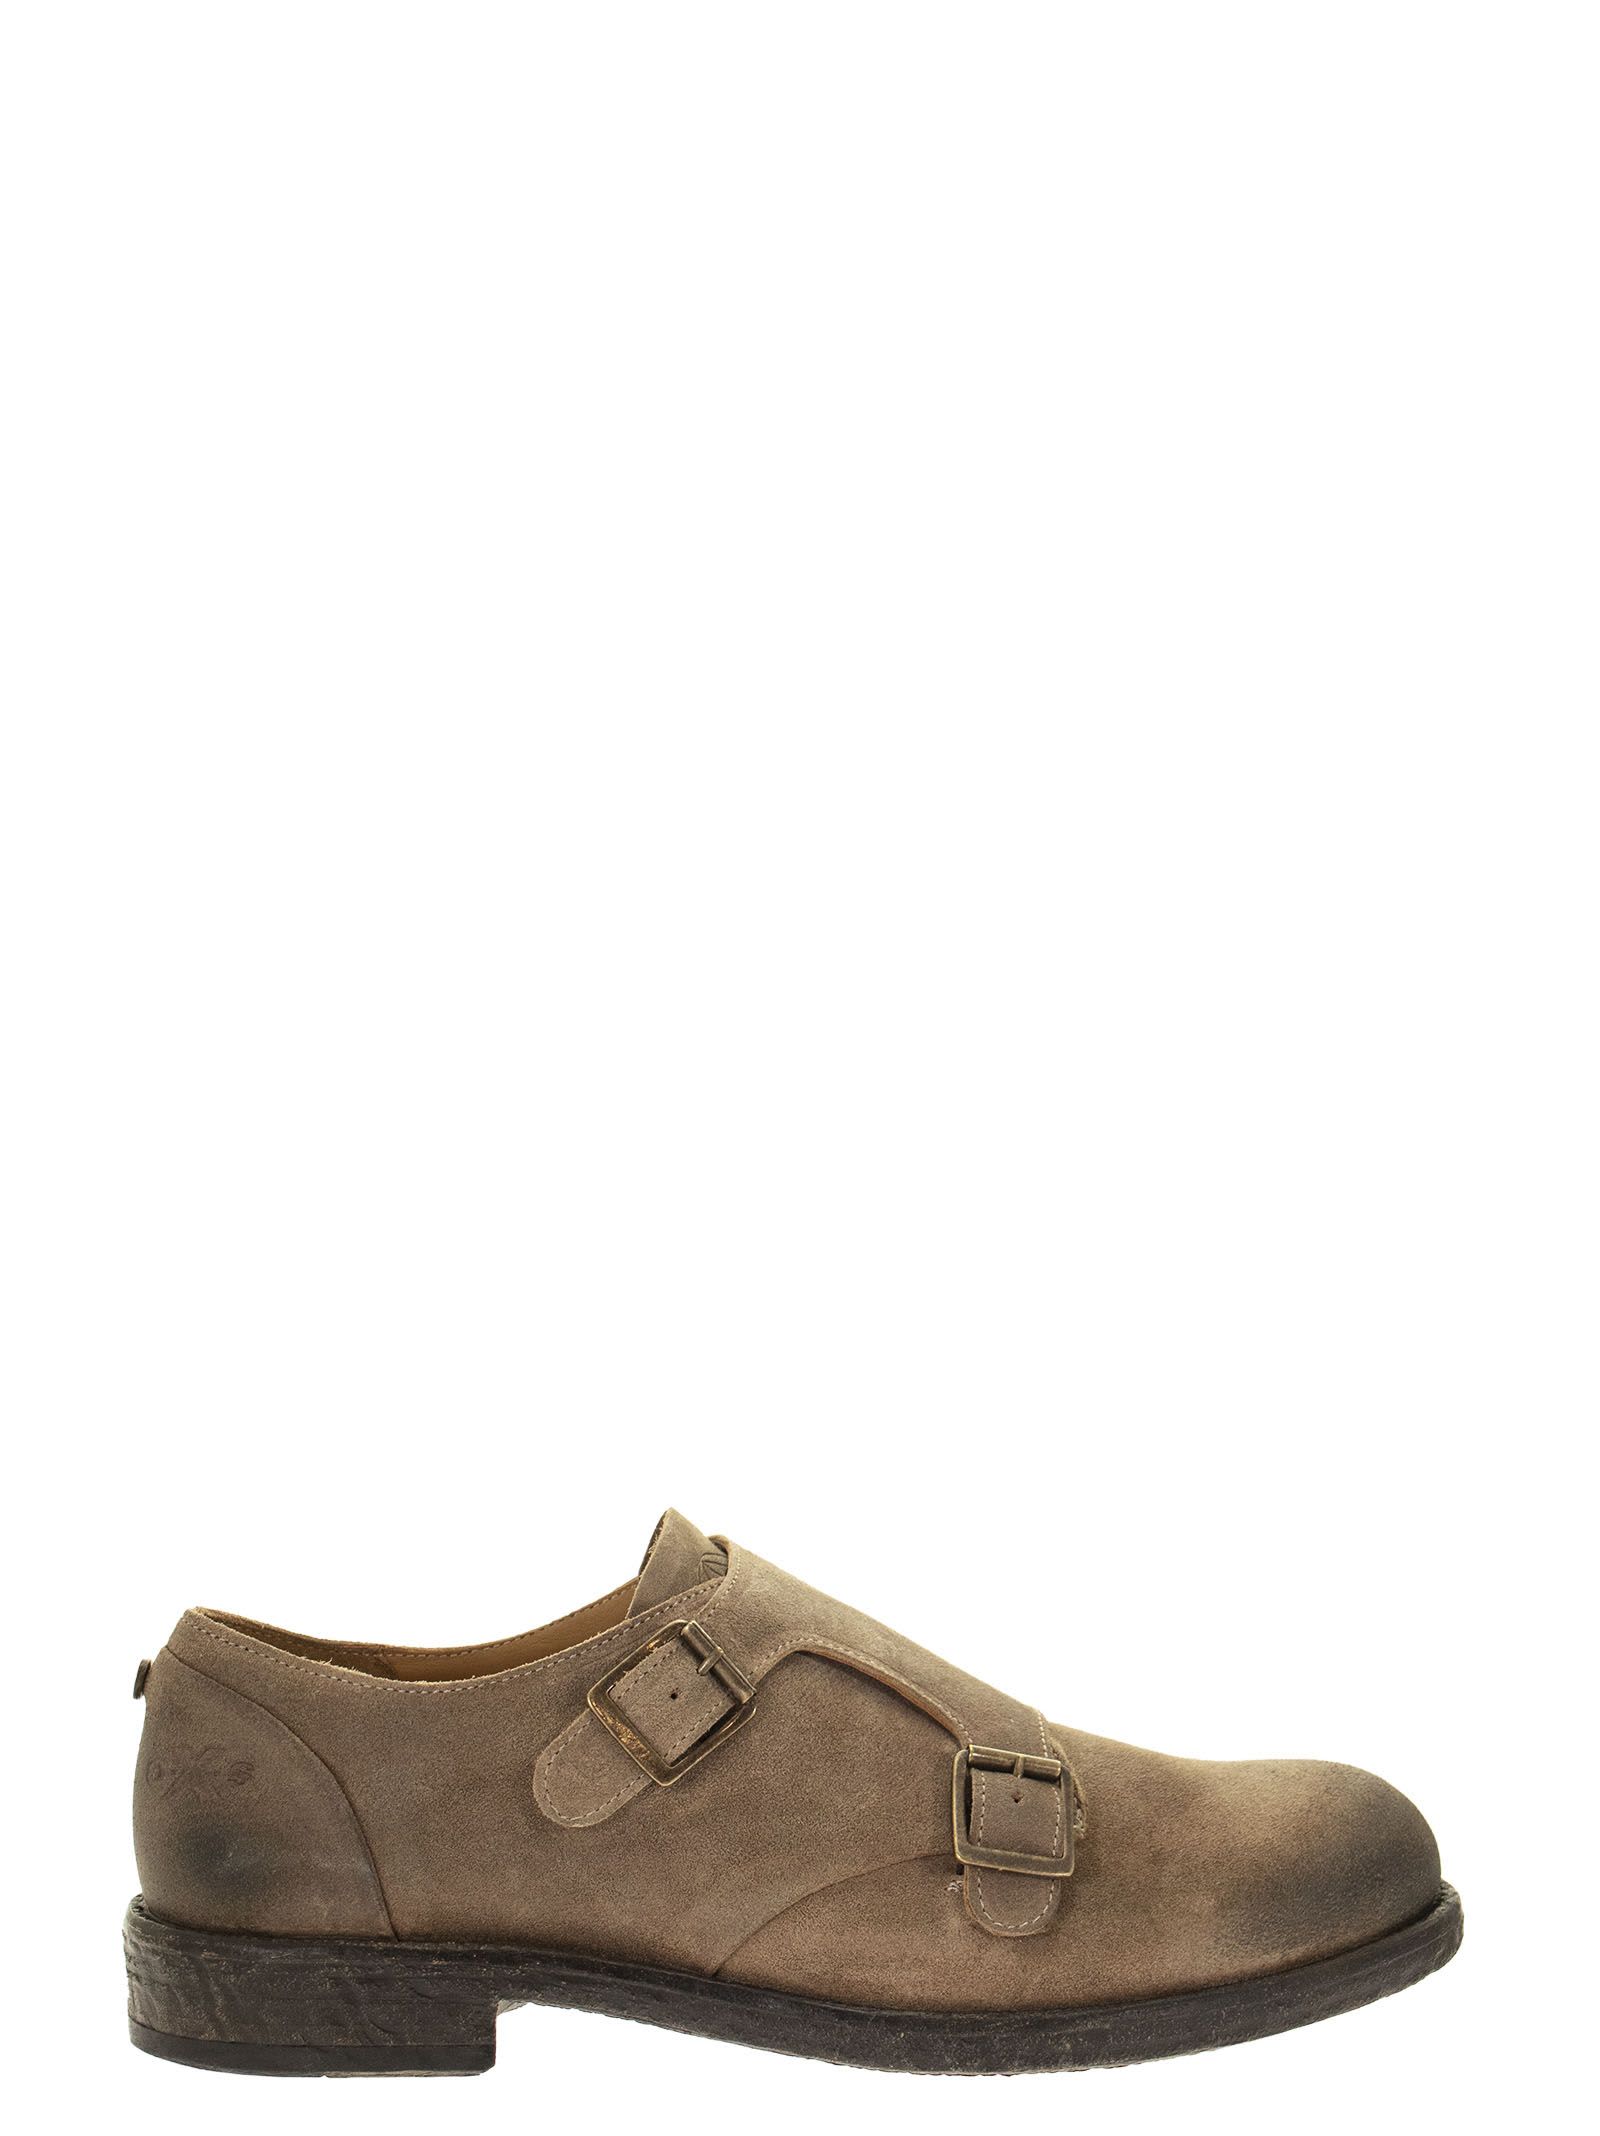 OXS Steve 1050 - Suede Shoe With Buckles